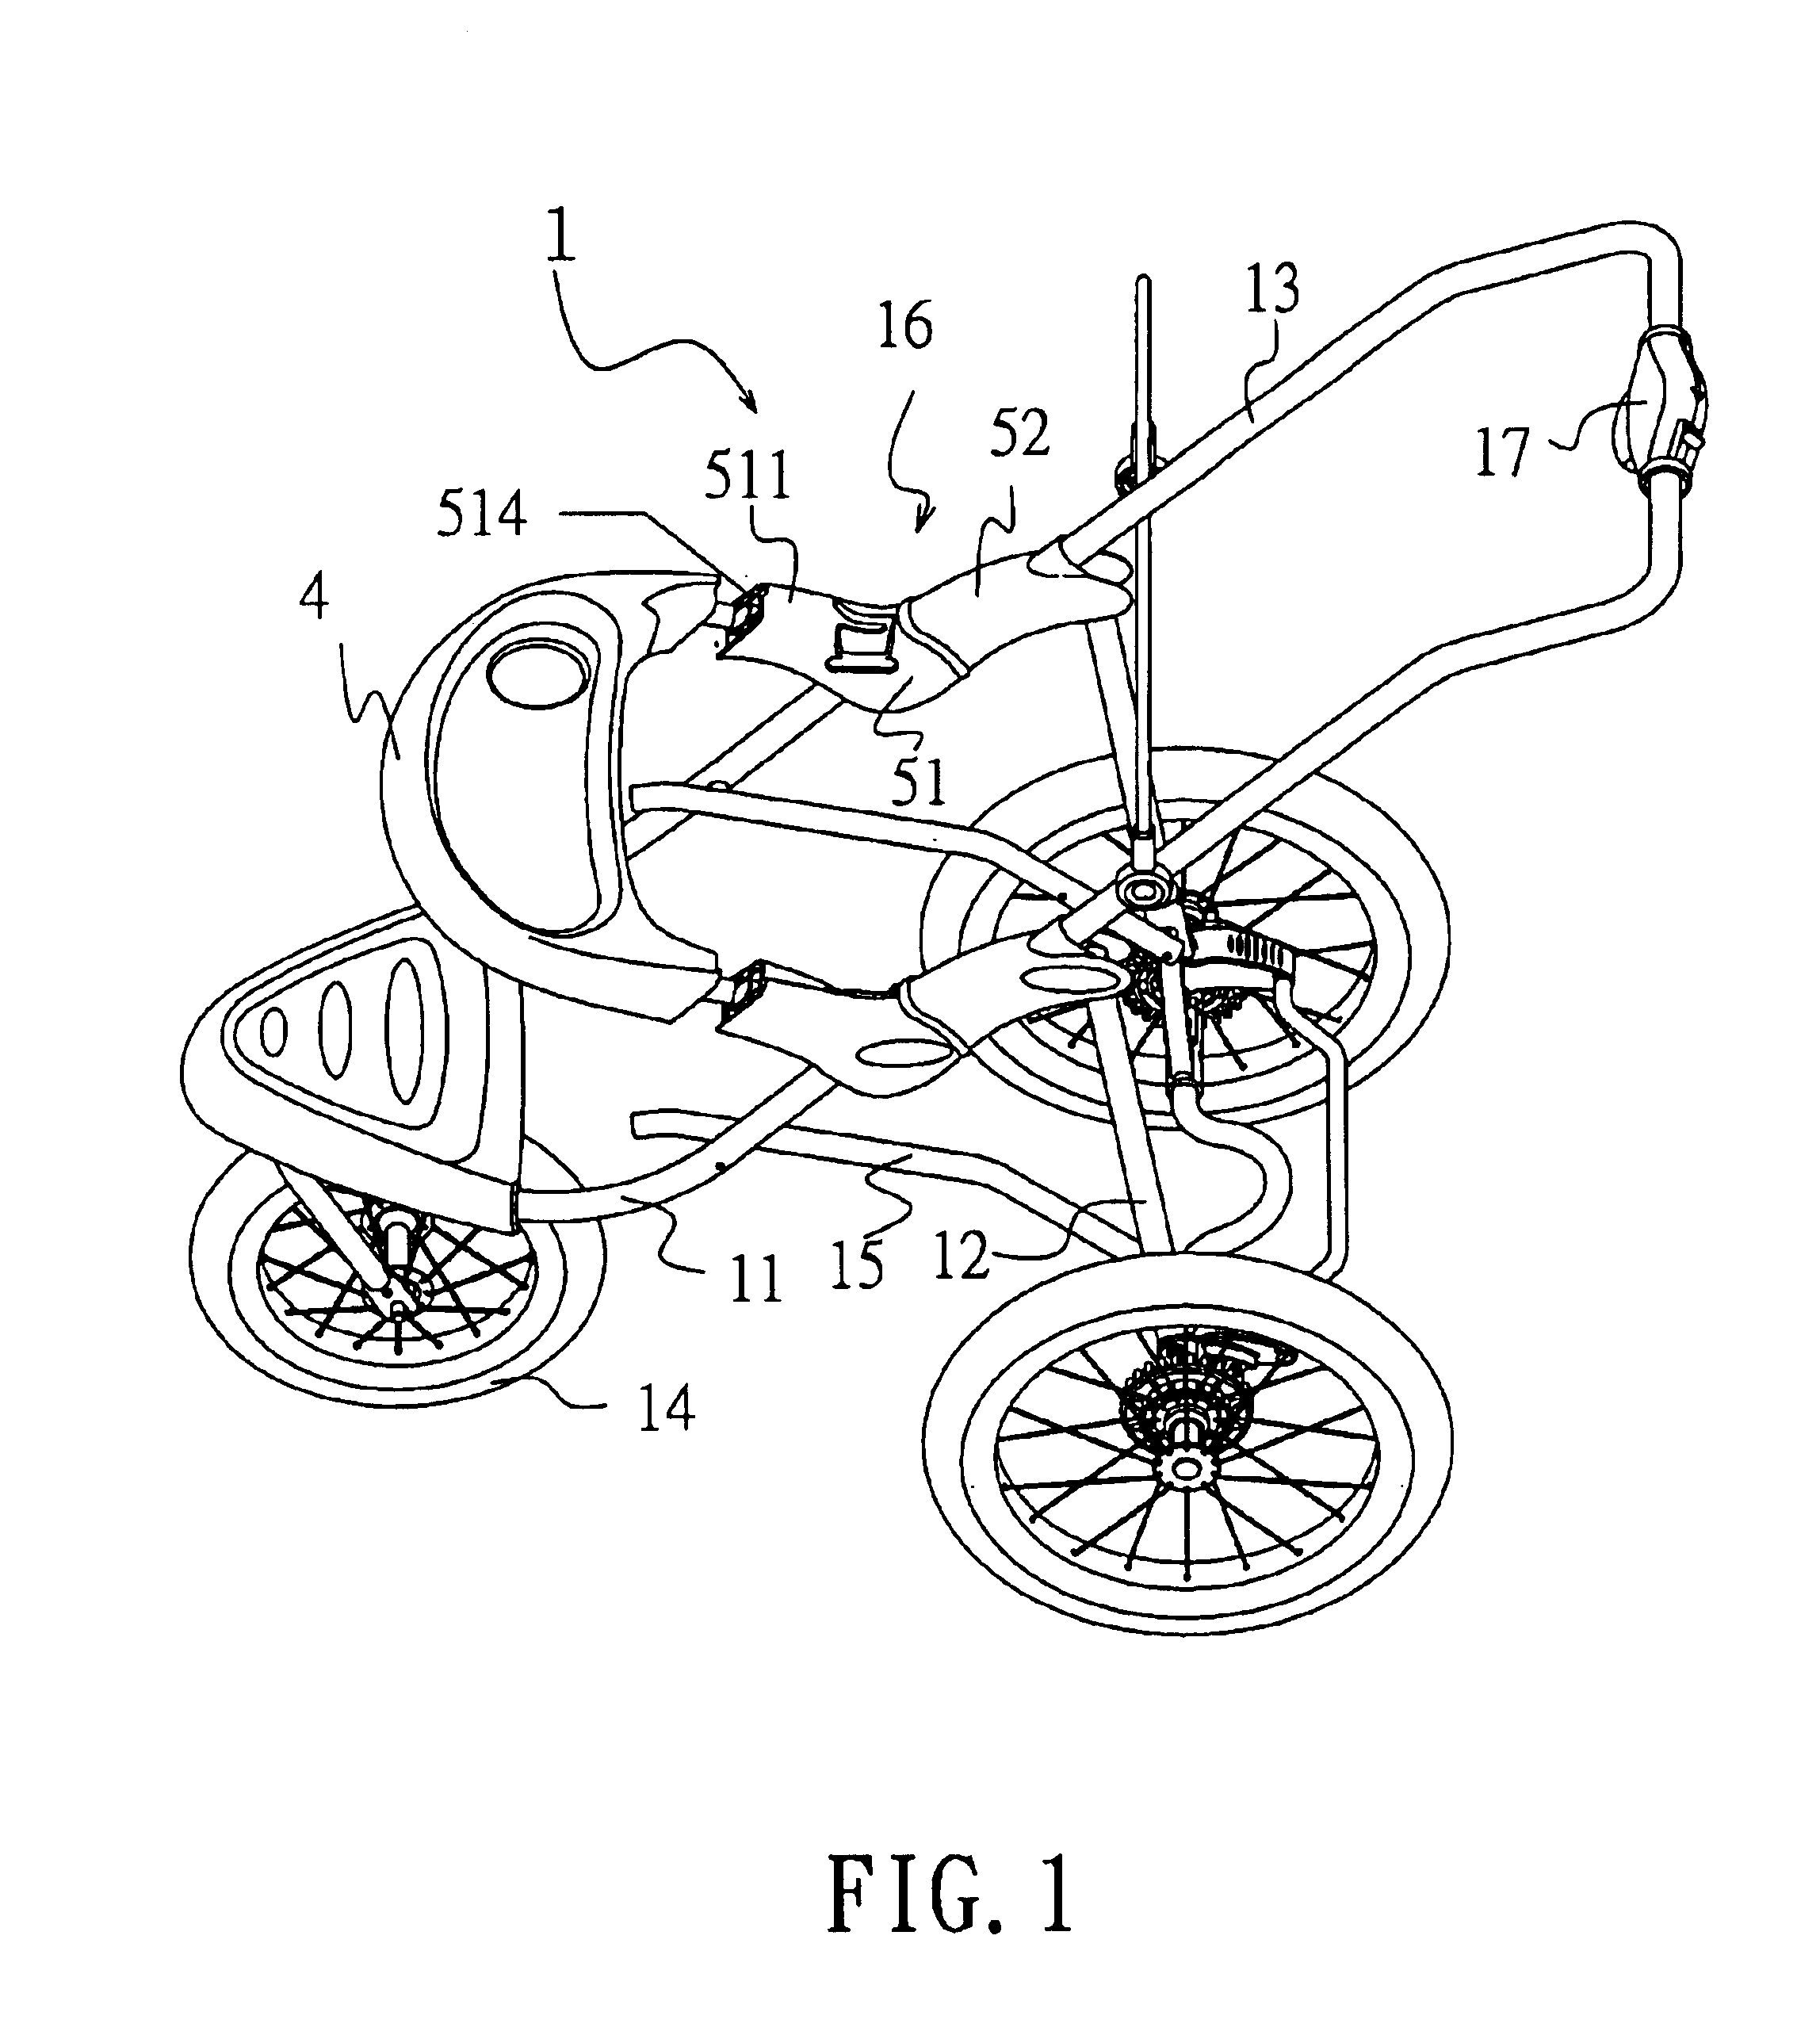 Safety seat anchoring mechanism for stroller